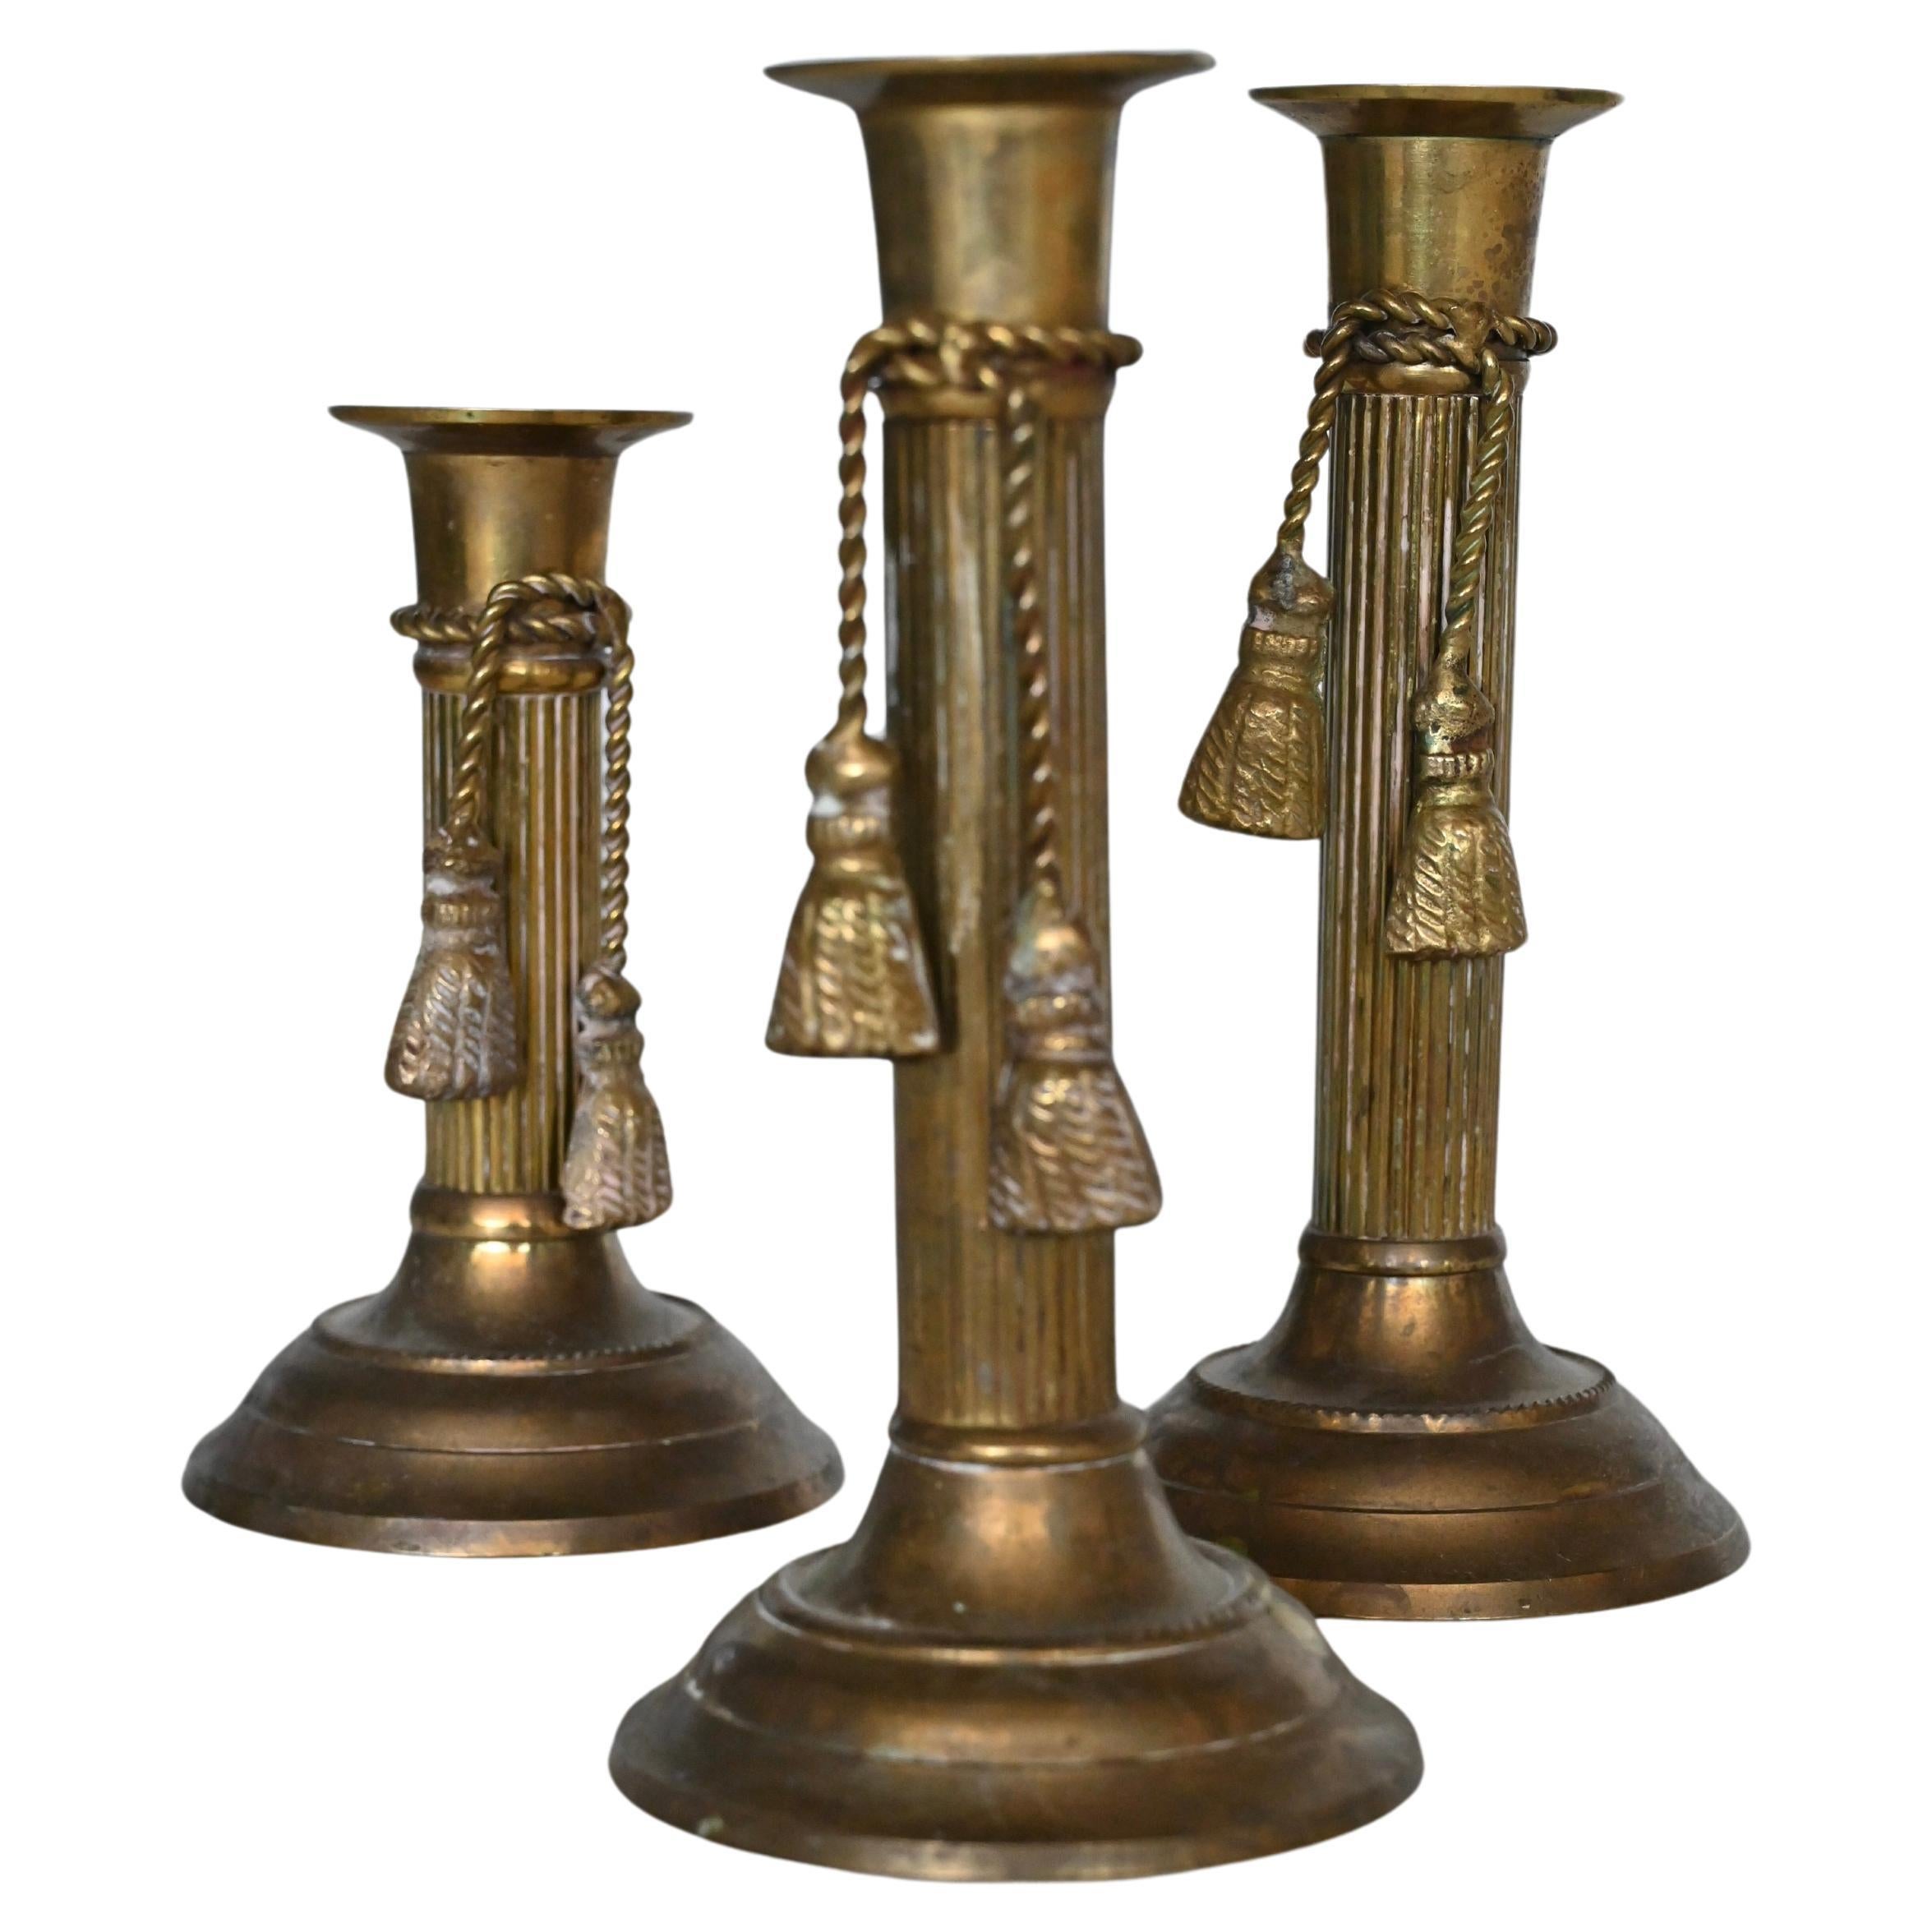 Set of three brass candleholders. Please note dimensions are approximate with heights varying from 5-6.4